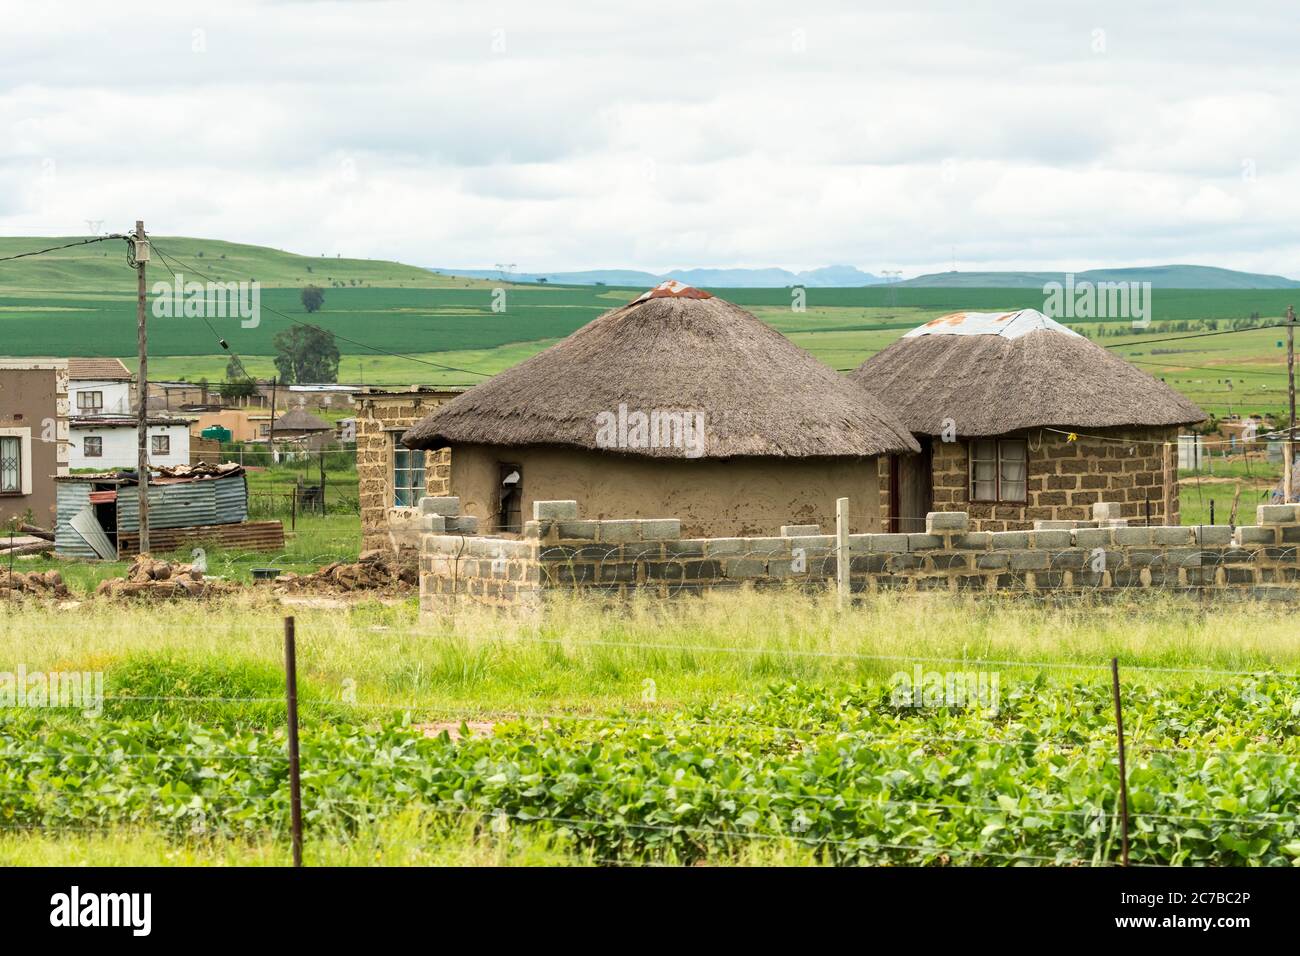 basic low cost housing in a rural agricultural farming community in Kwazulu Natal, South Africa Stock Photo